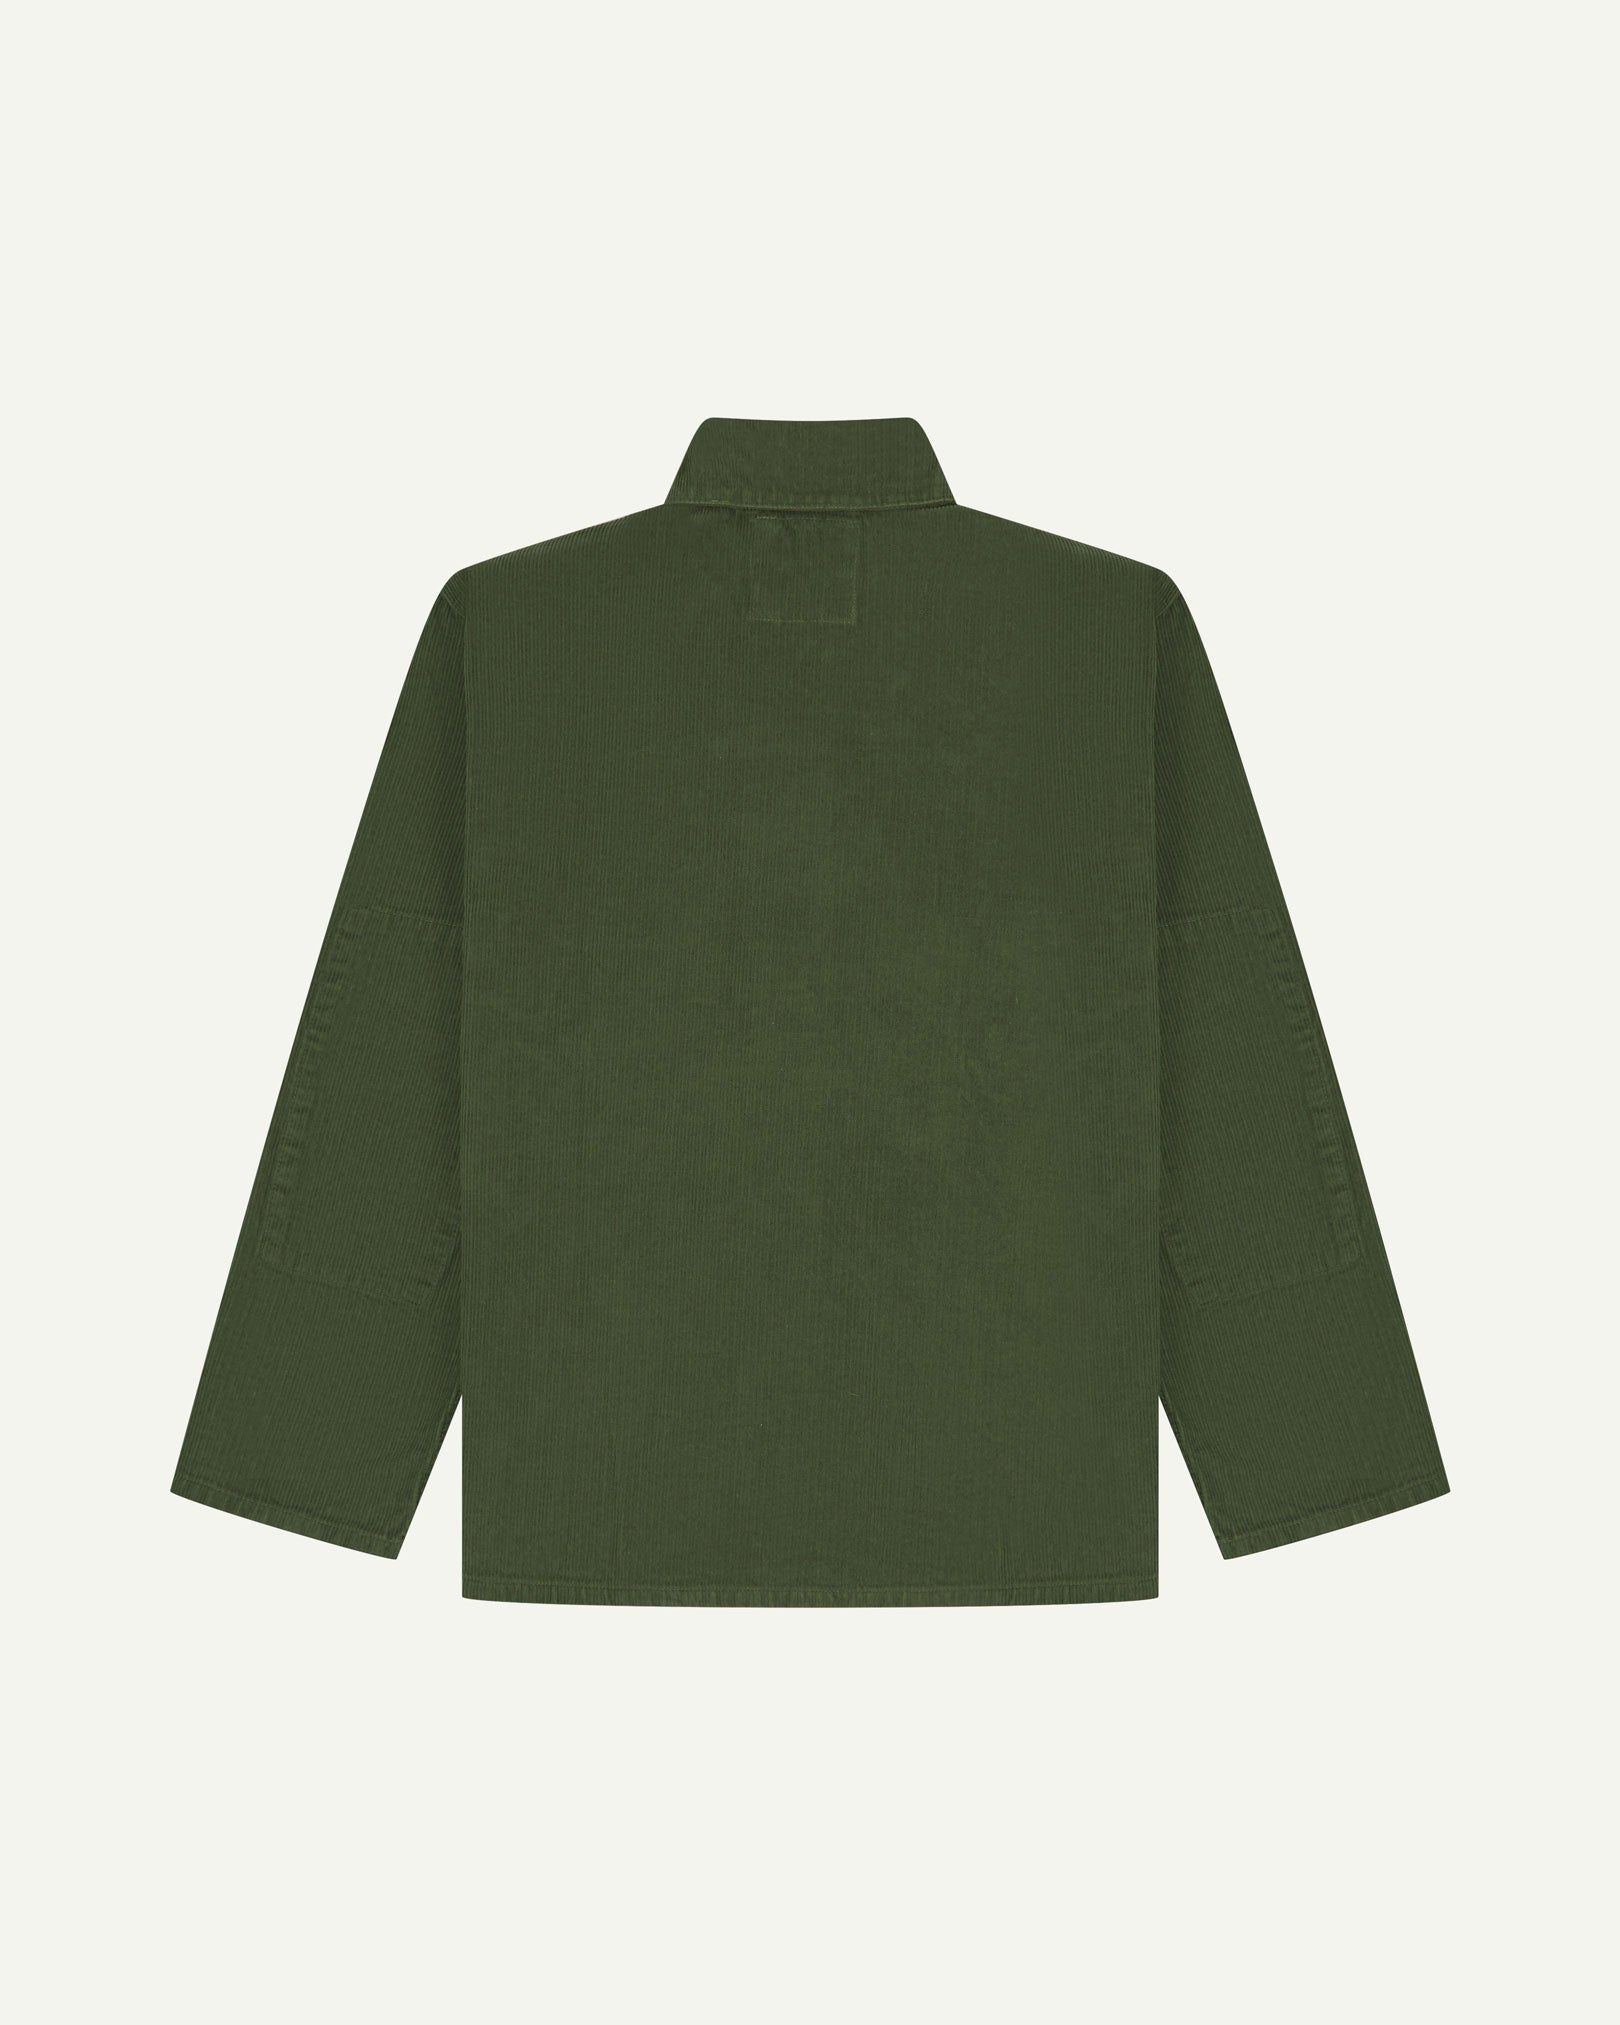 Back view of coriander-green, buttoned corduroy overshirt with view of reinforced elbow area and boxy silhouette.